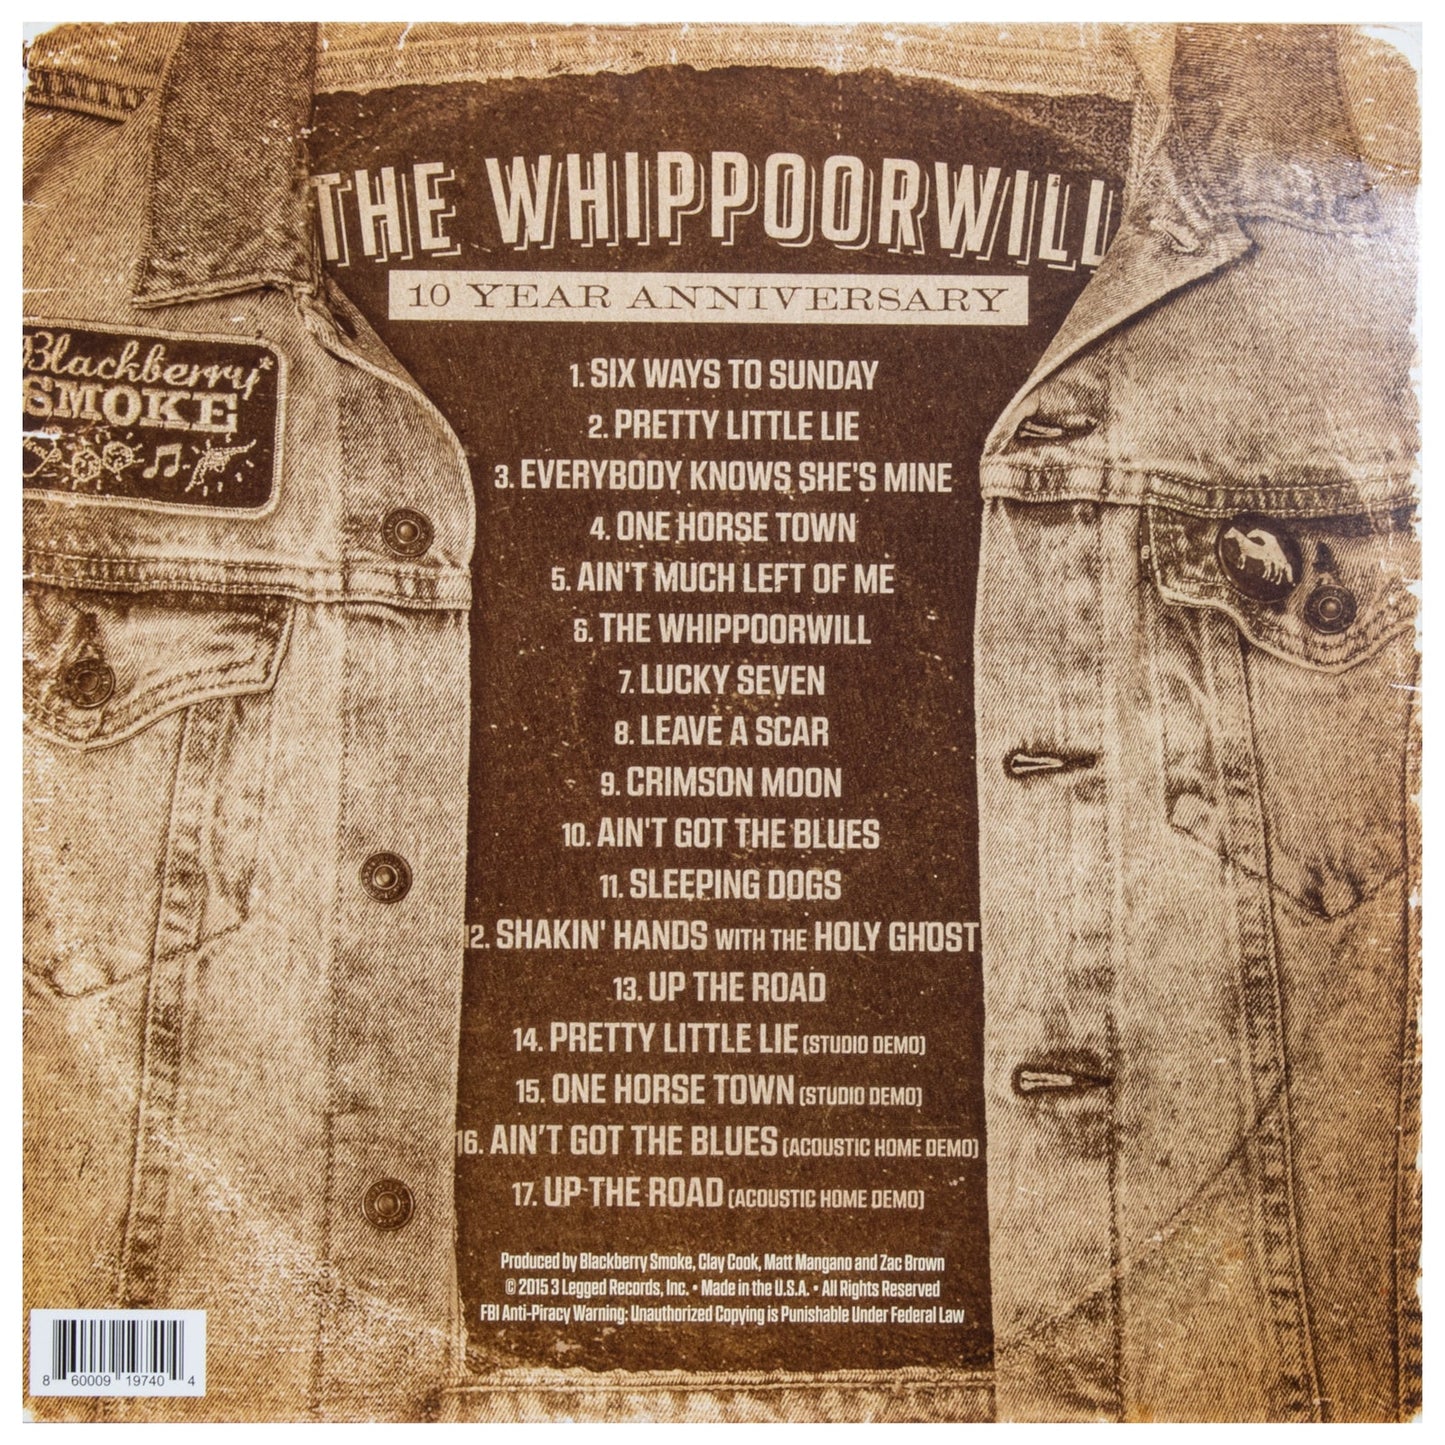 THE WHIPPOORWILL SPECIAL Edition LP